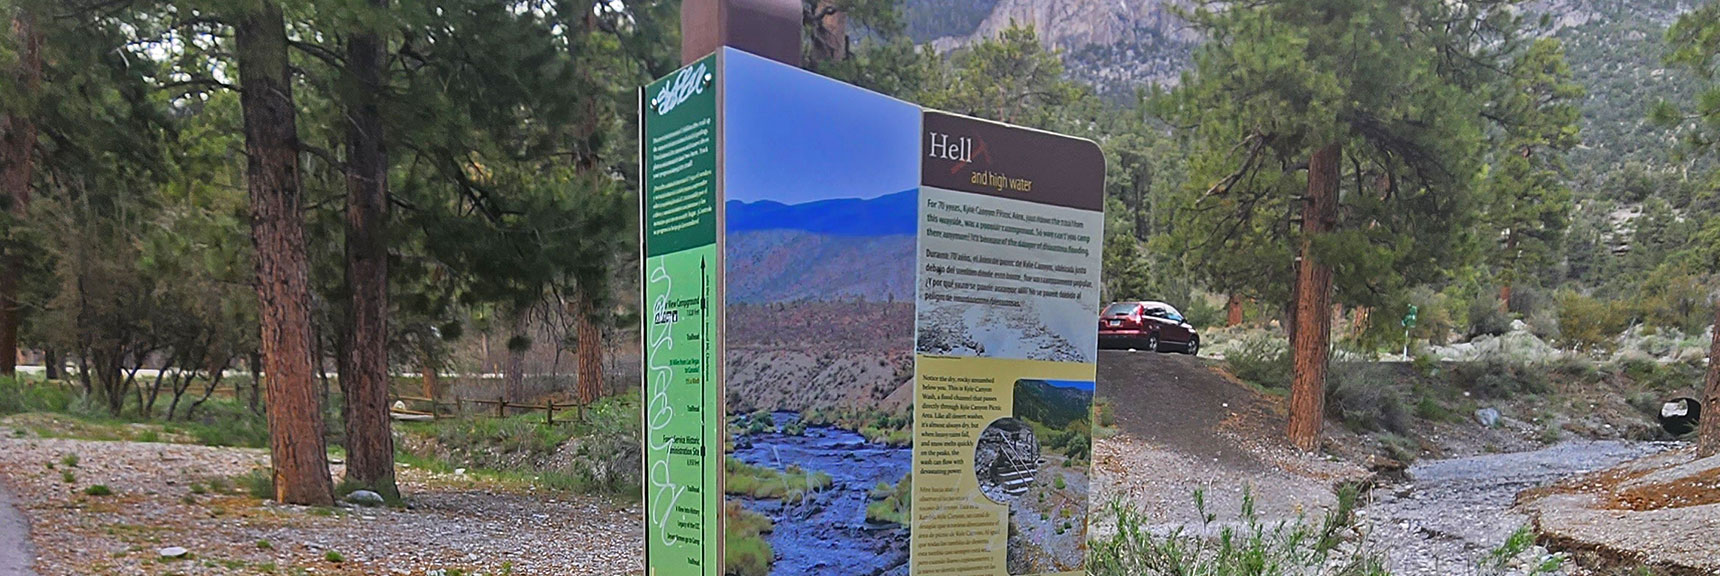 Flash Floods Once Wiped Out a Campground Below, Floods Caused 20 Deaths in an Arkansas Campground. | Acastus Trail | Mt Charleston Wilderness | Spring Mountains, Nevada